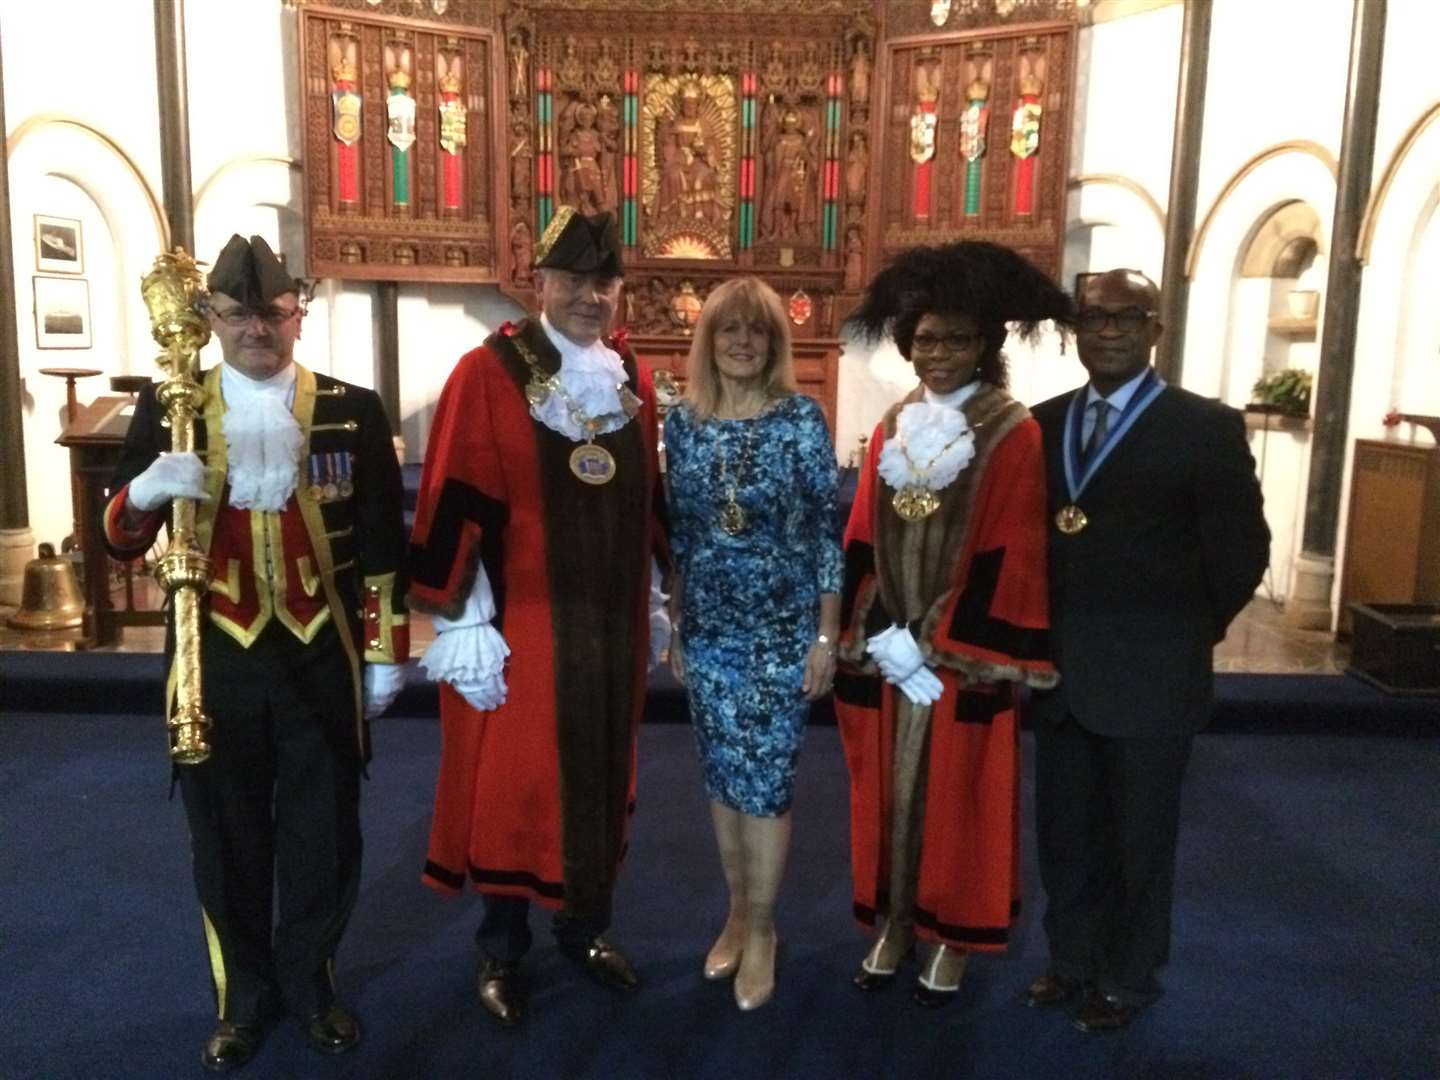 L-R: Gary Carden civic and ceremonial officer; mayor Cllr Stuart Tranter and mayoress Sarah Tranter; deputy mayoress Cllr Gloria Opara and deputy mayor Richard Opara